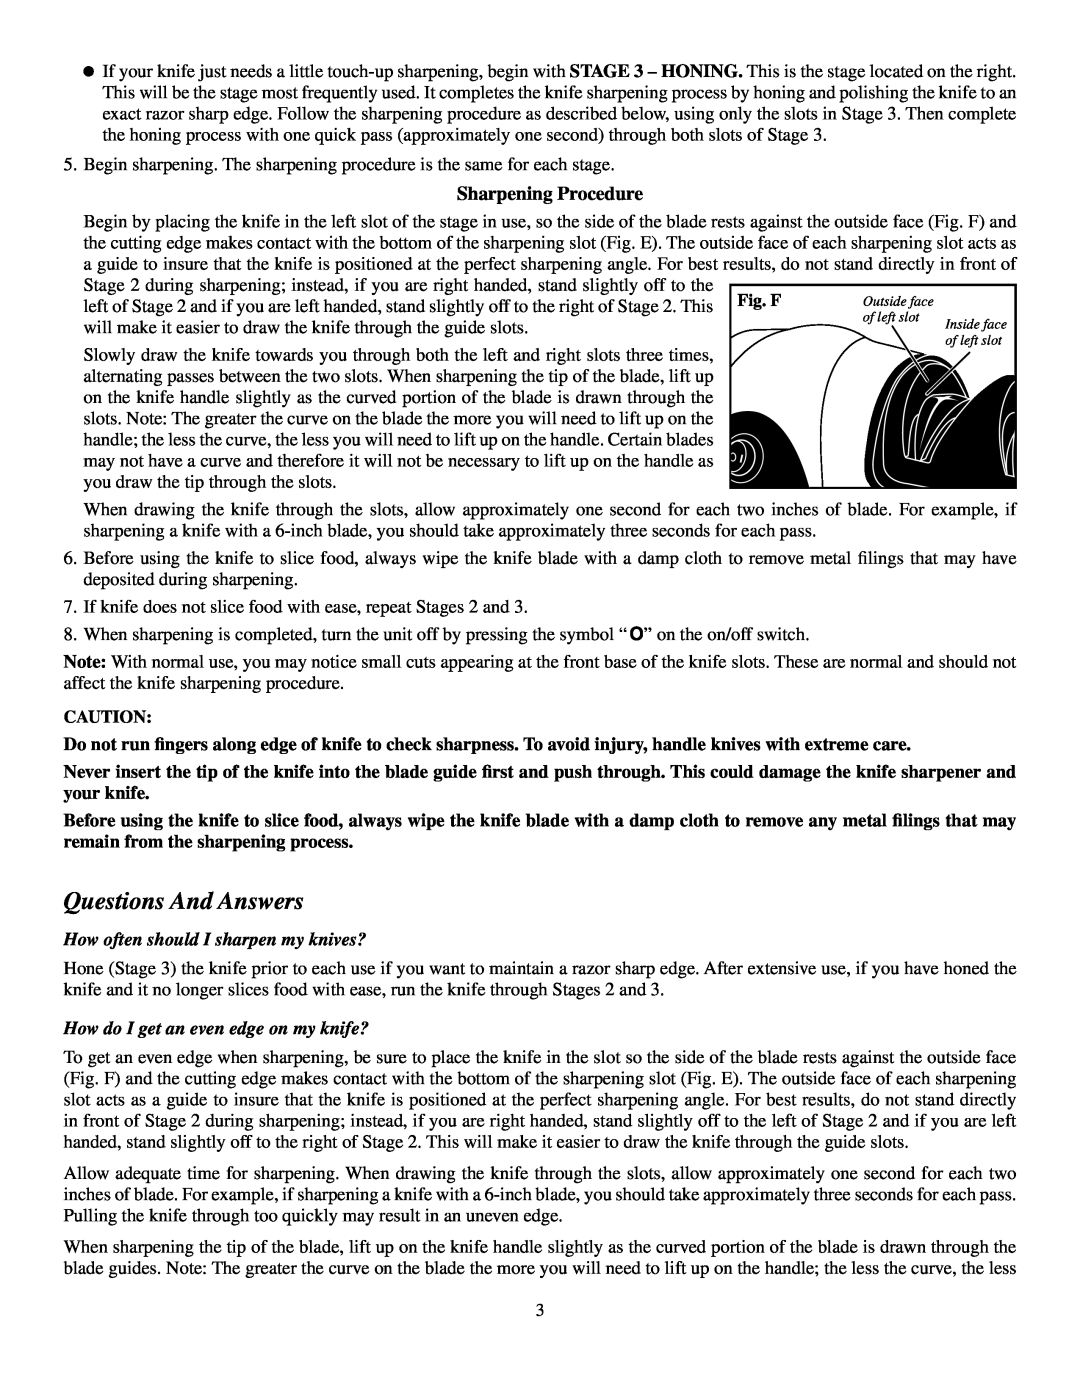 Presto Electric Knife Sharpener manual Questions And Answers, Sharpening Procedure, How often should I sharpen my knives? 